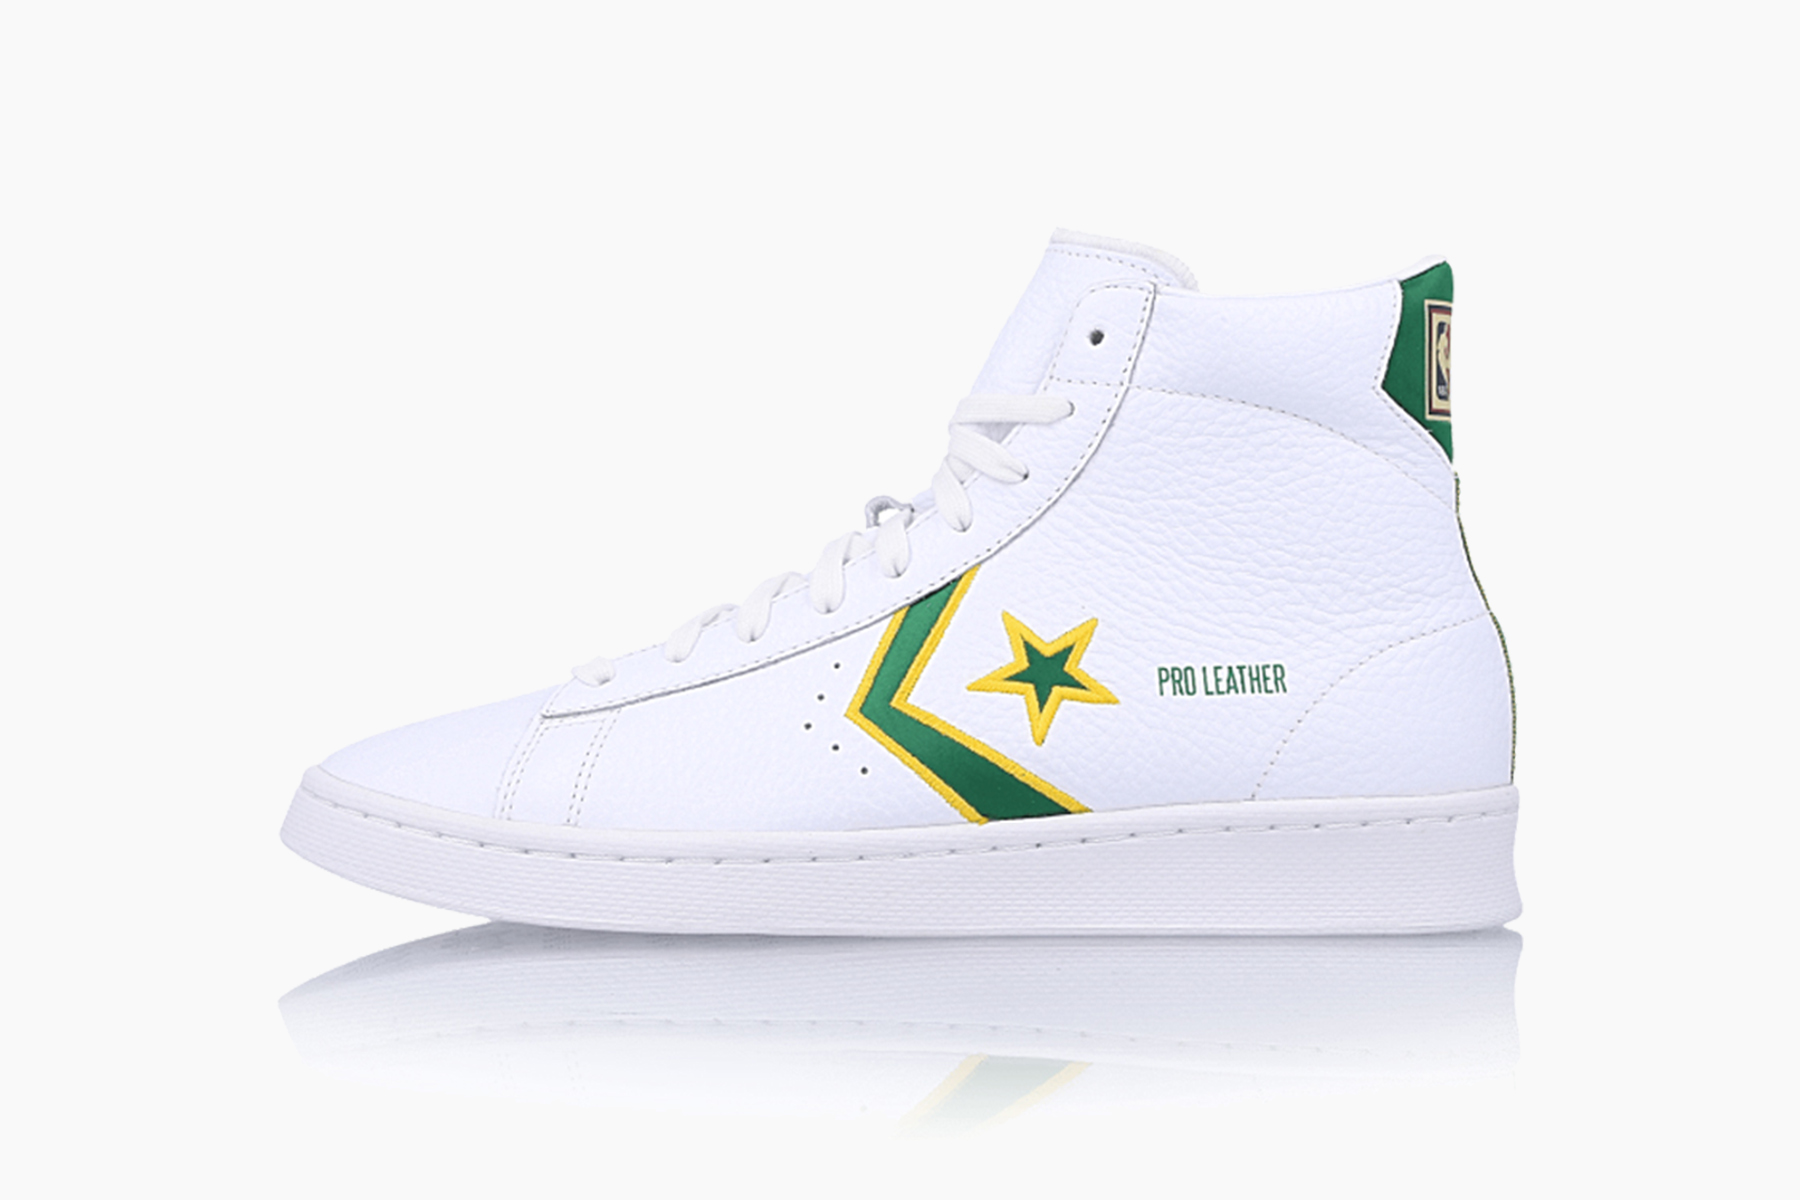 Debuts the Pro Leather Mid "Celtics" Hypebeast